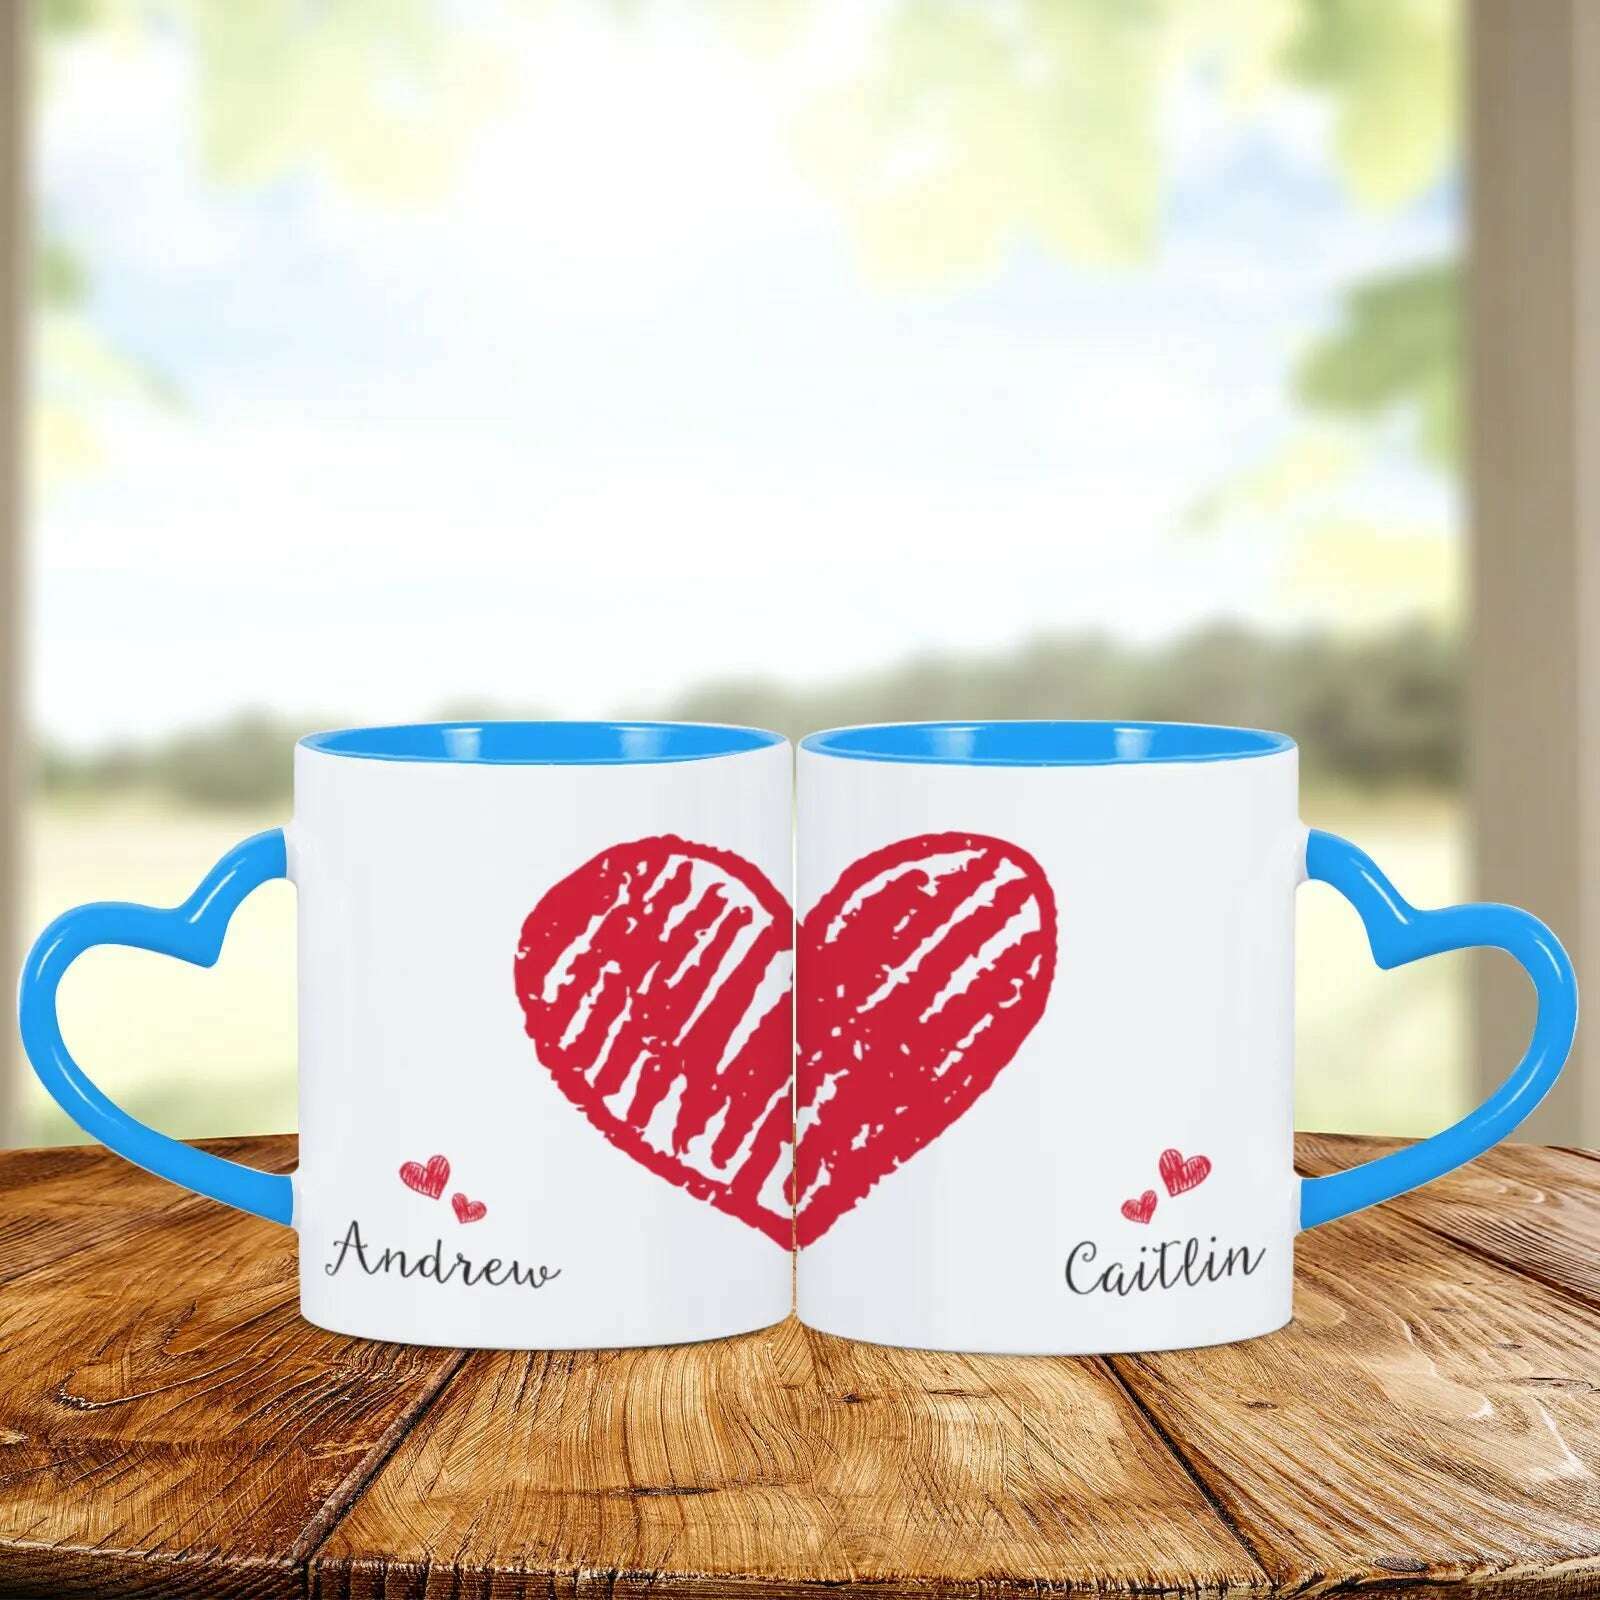 KIMLUD, 2pc Heart Handle Personalized Name Couple Coffee Mug for Girlfriend Wife Husband Valentine's Day present for Couples Coffee Mugs, Blue / 325ml, KIMLUD Womens Clothes